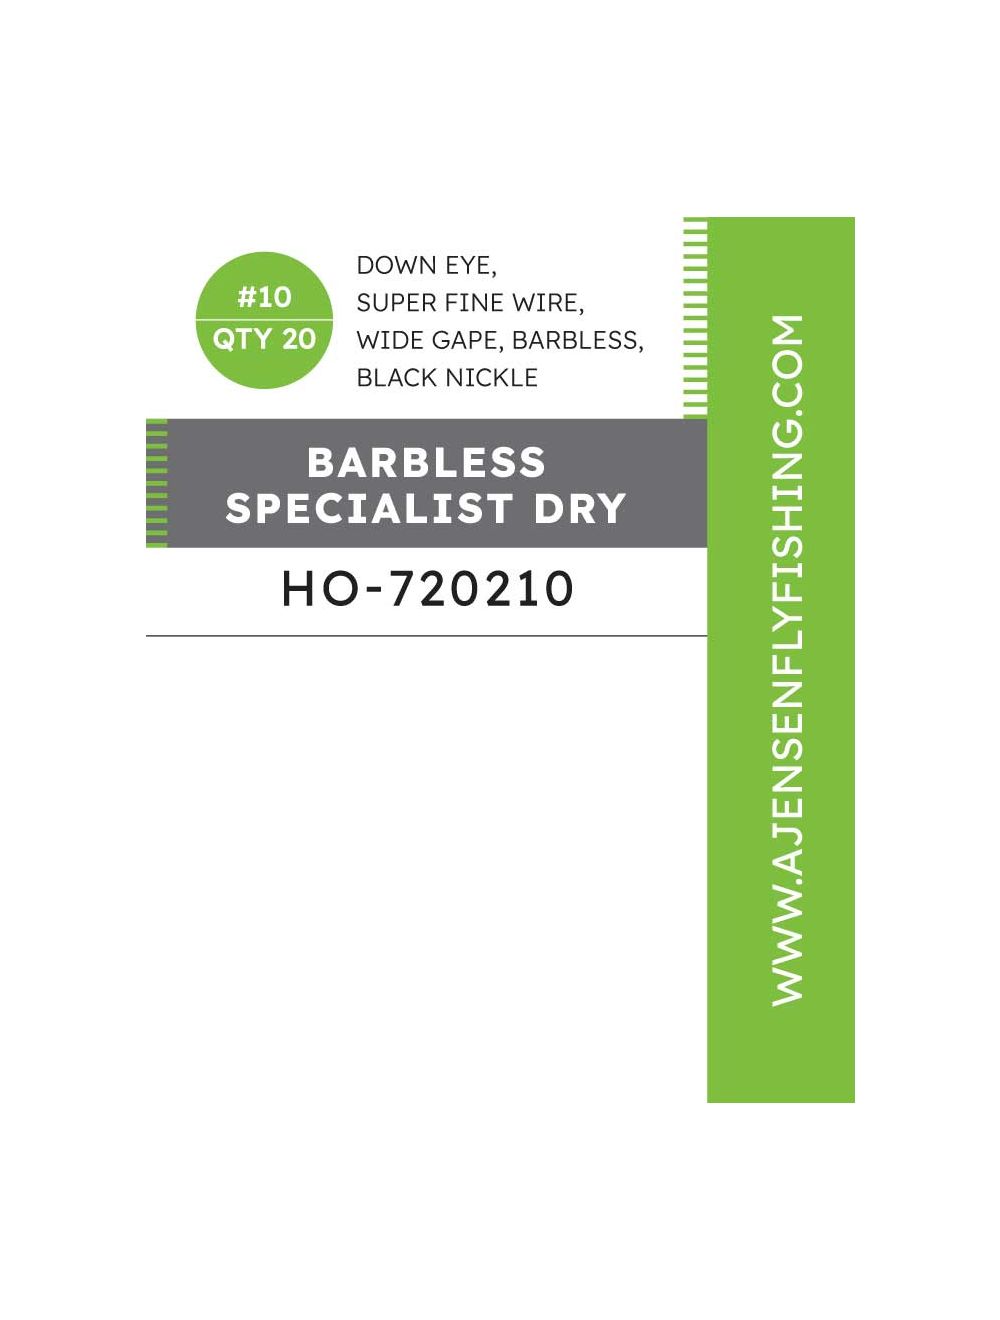 Barbless Specialist dry